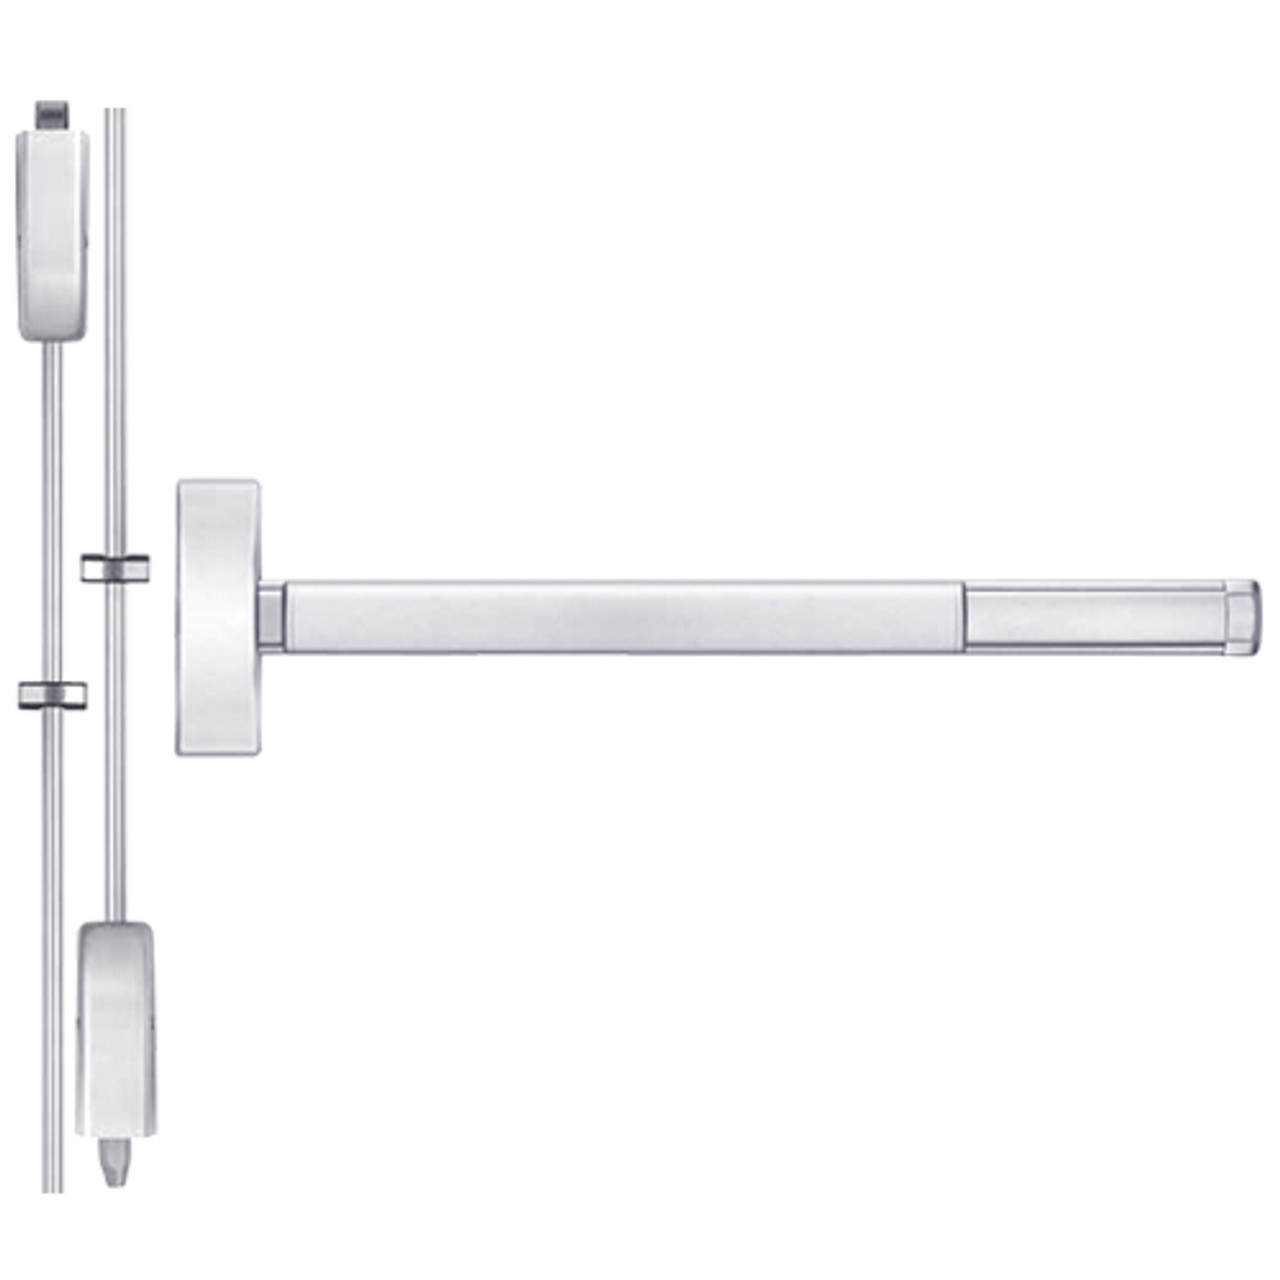 TSFL2203LBR-625-36 PHI 2200 Series Apex Surface Vertical Rod Device with Touchbar Monitoring Switch Prepped for Key Retracts Latchbolt in Bright Chrome Finish